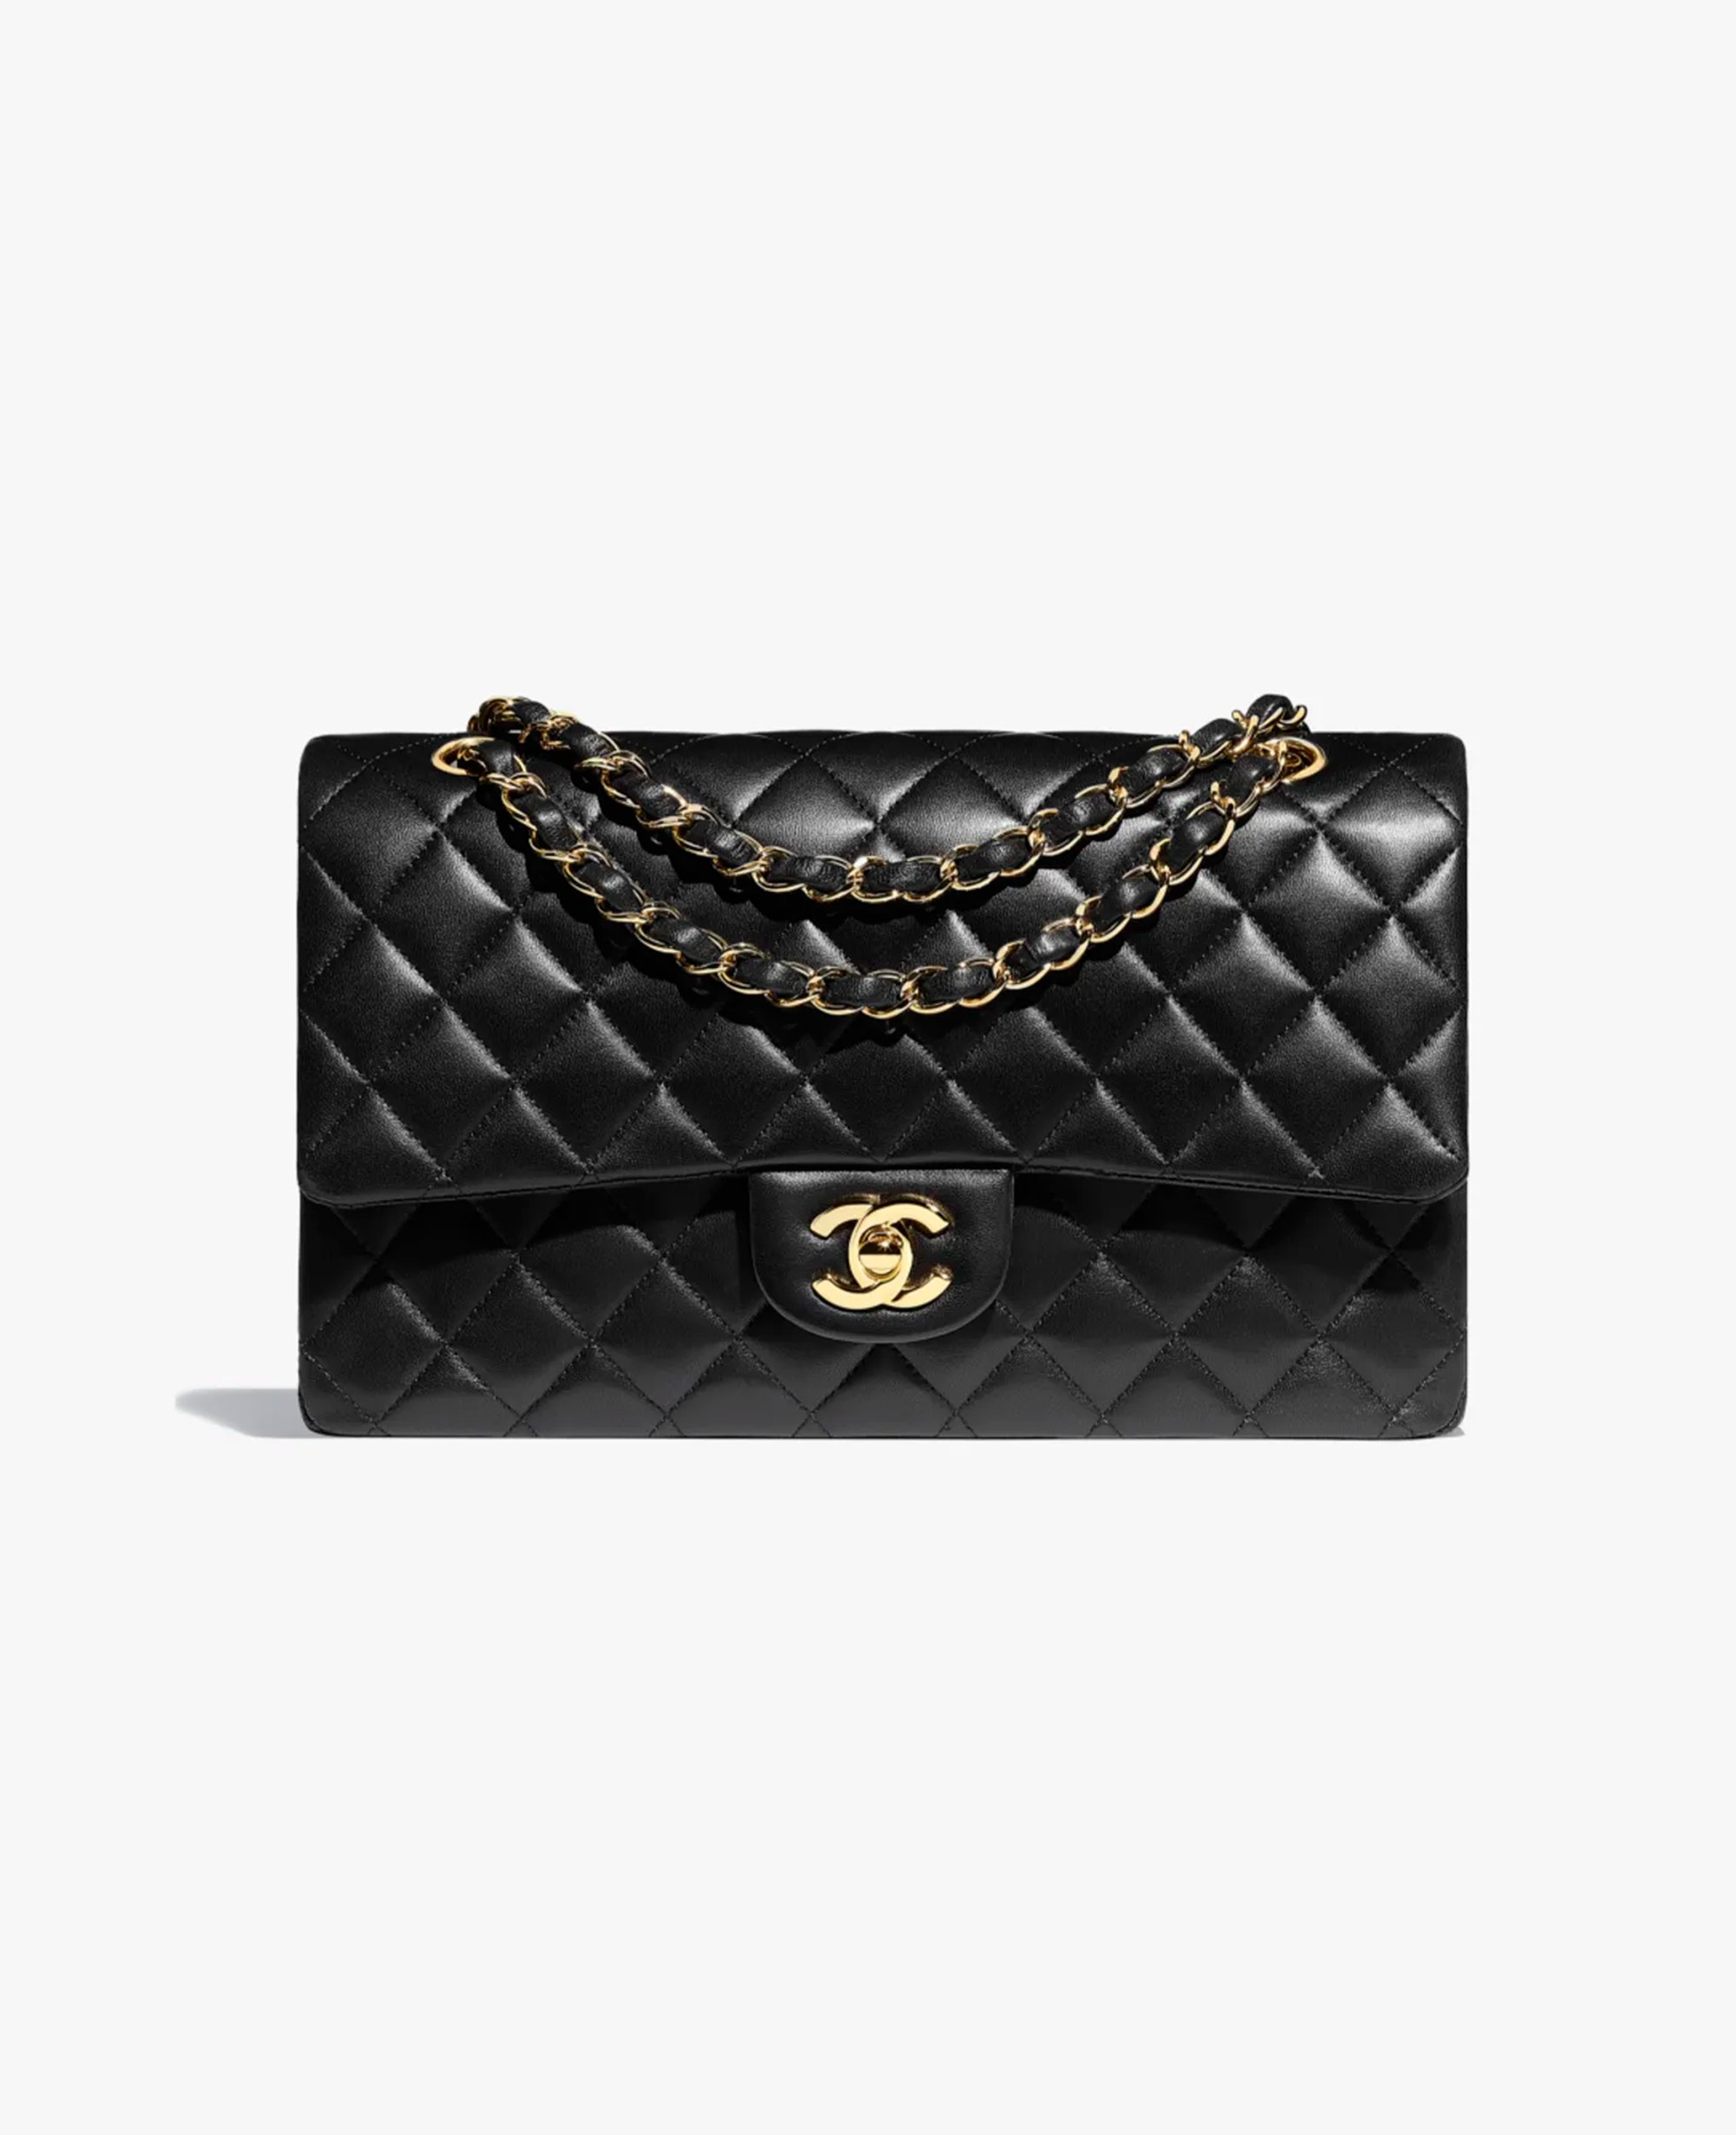 The Best Chanel Dupes Of Jackets, Sandals And Bags On The High Street